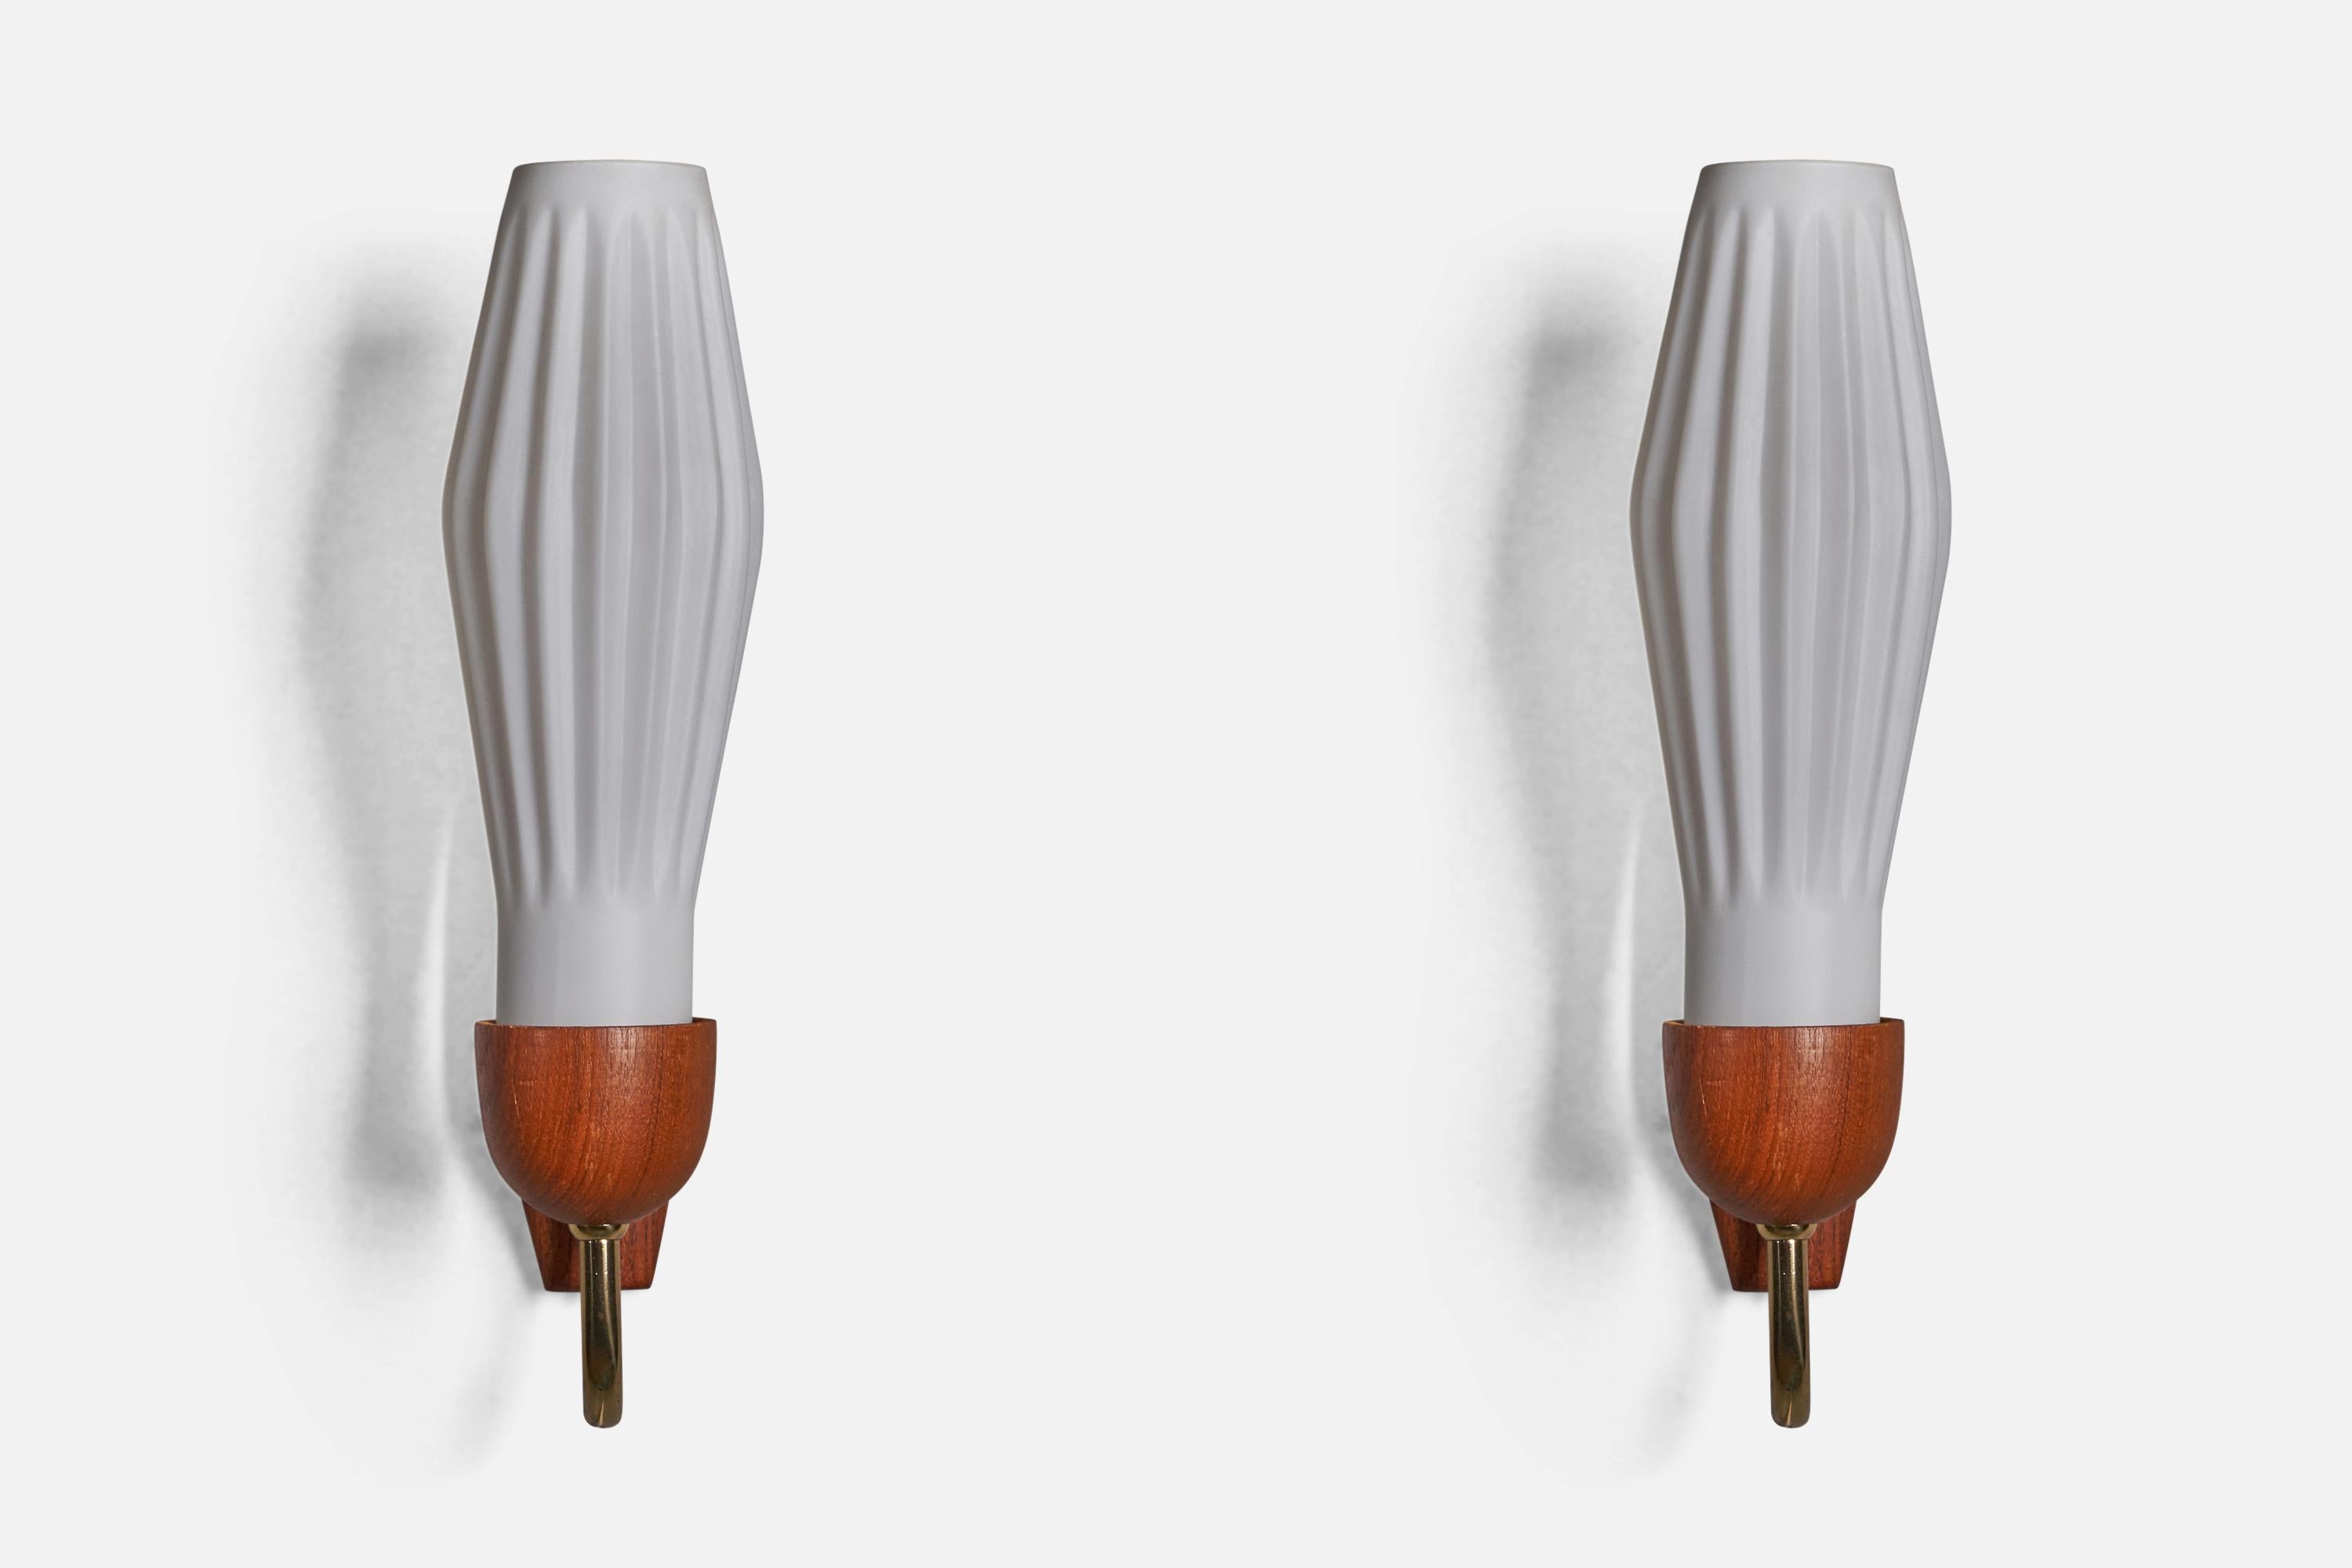 A pair of glass, brass and teak wall lights, designed and produced in Denmark, 1950s

Overall Dimensions (inches): 12